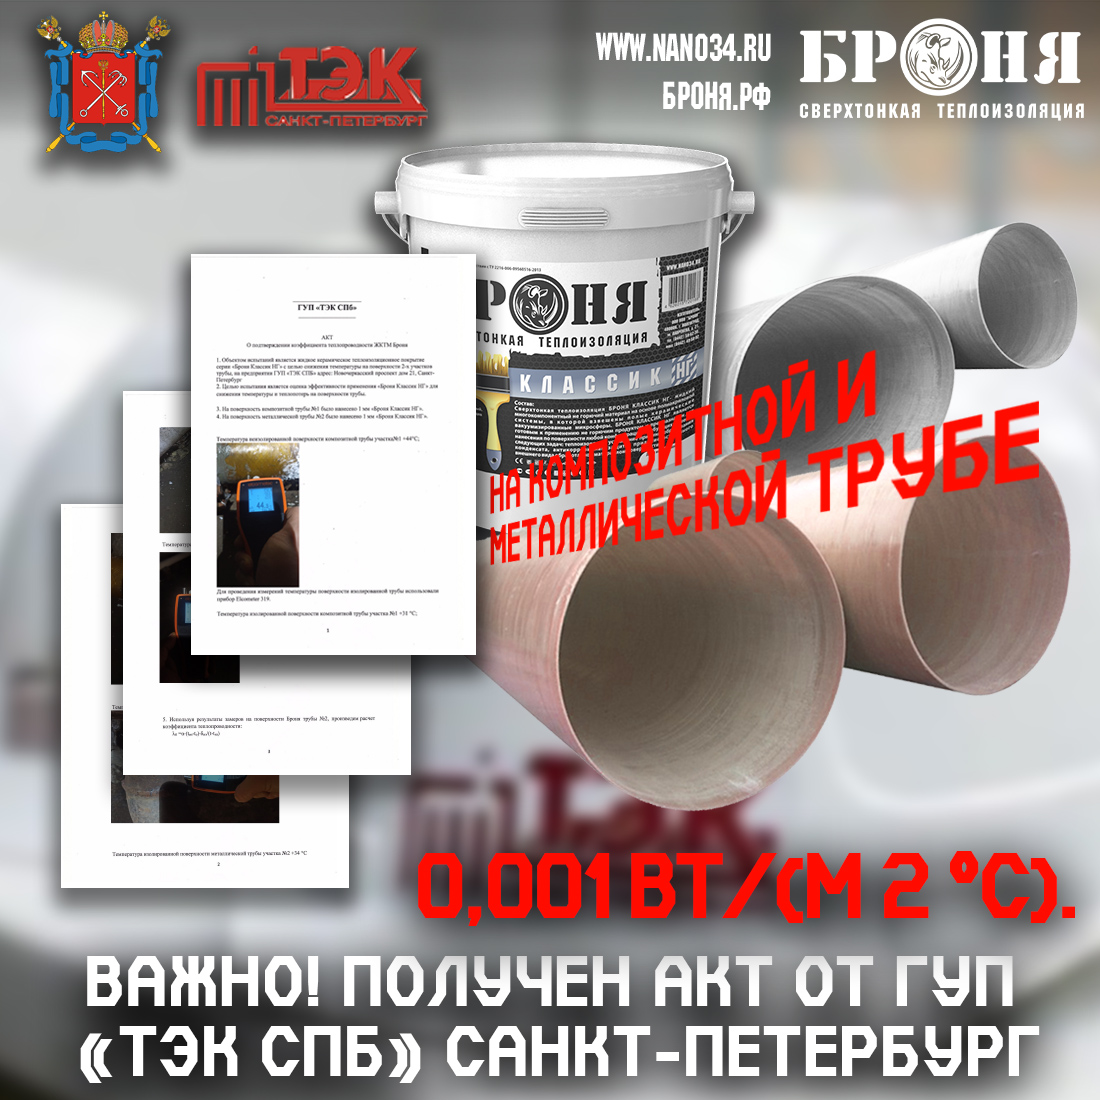 IMPORTANT! Bronya Saint Petersburg received a certificate from the State Unitary Enterprise "TEK SPB" of St. Petersburg confirming the thermal conductivity coefficient of Bronya insulation -0.001 W/( m 2 ° С).